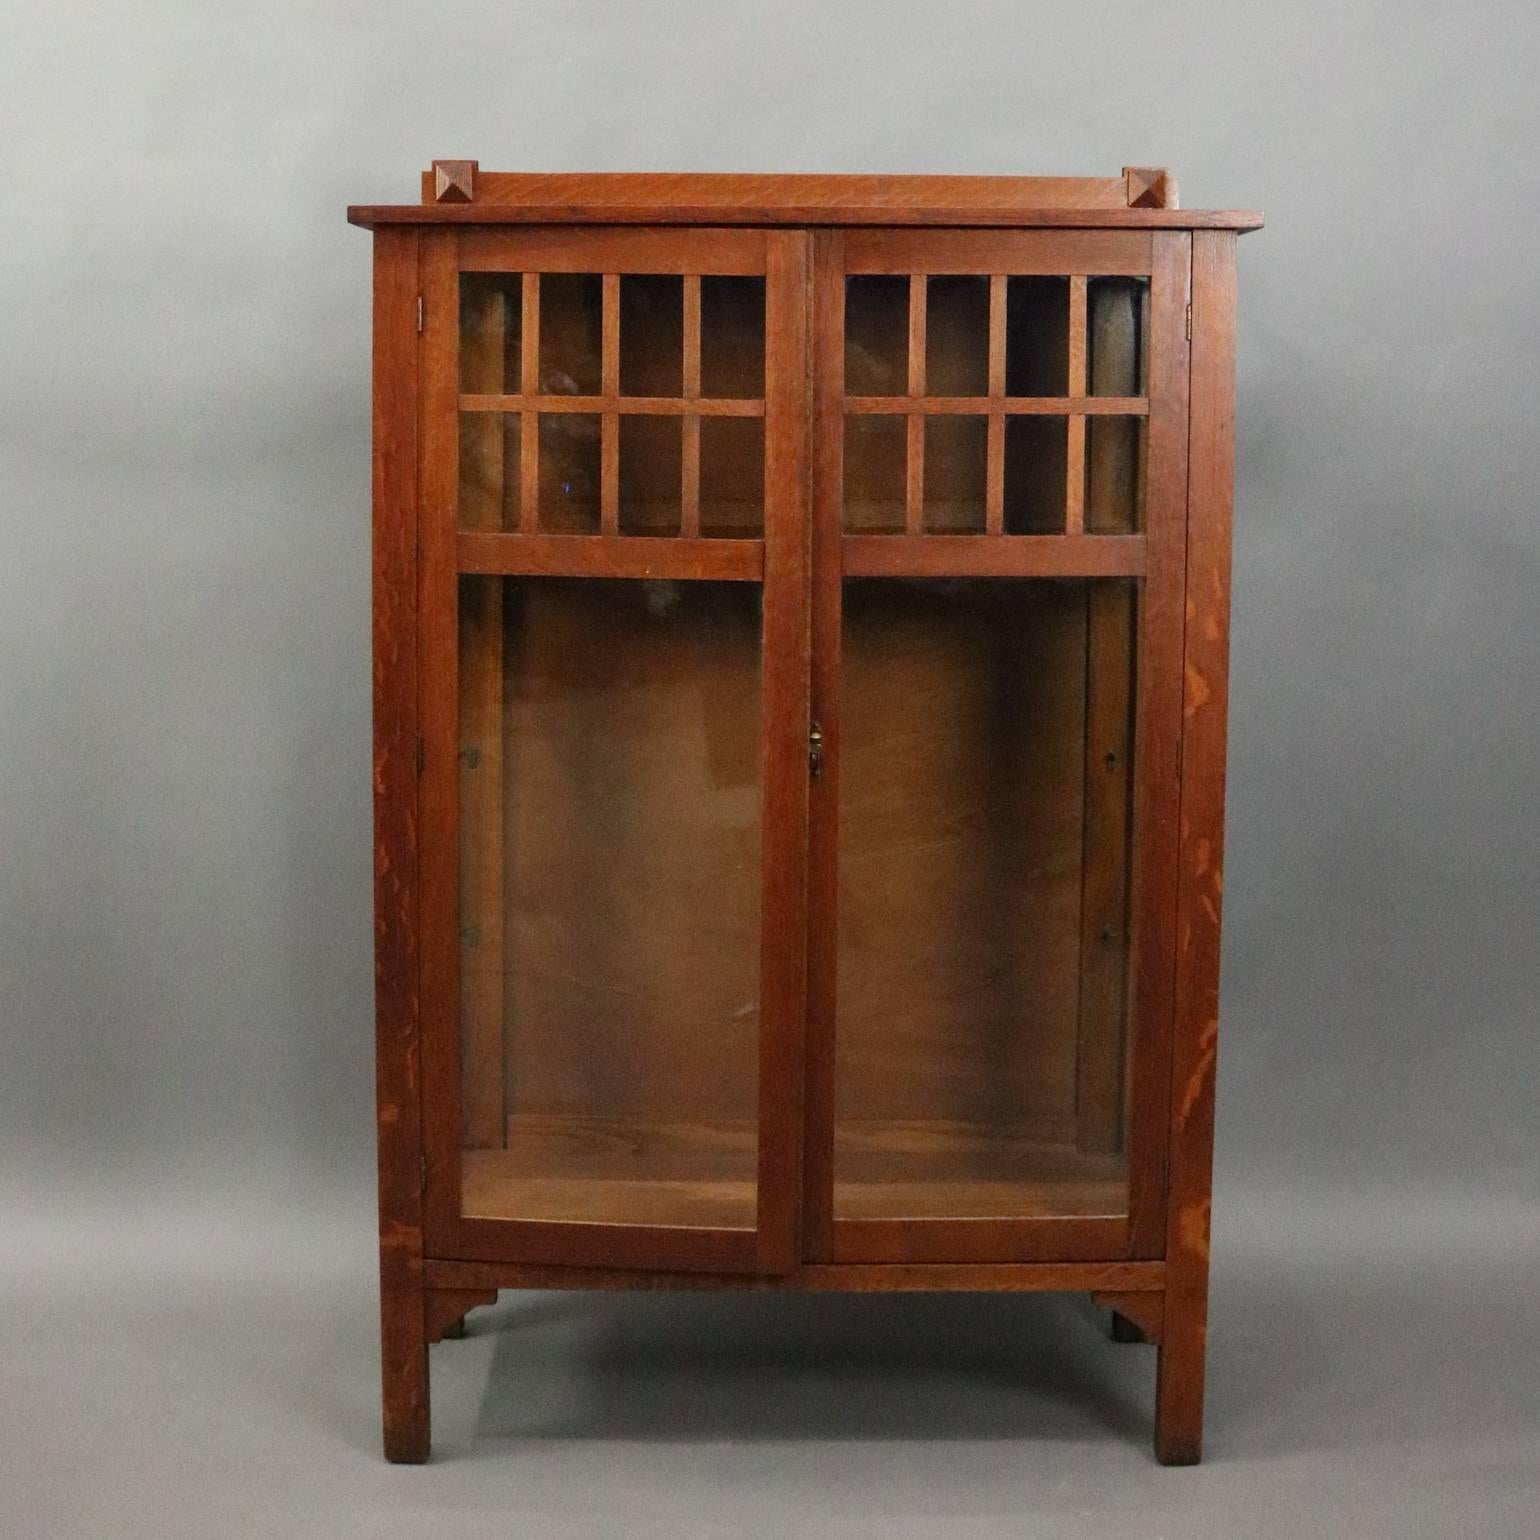 Antique Arts and Crafts Mission oak china cabinet features traditional simple and functional design with double glass doors with paneled upper opening to interior oak shelving, circa 1910

Measures: 61" H x 40" W x 16" D.